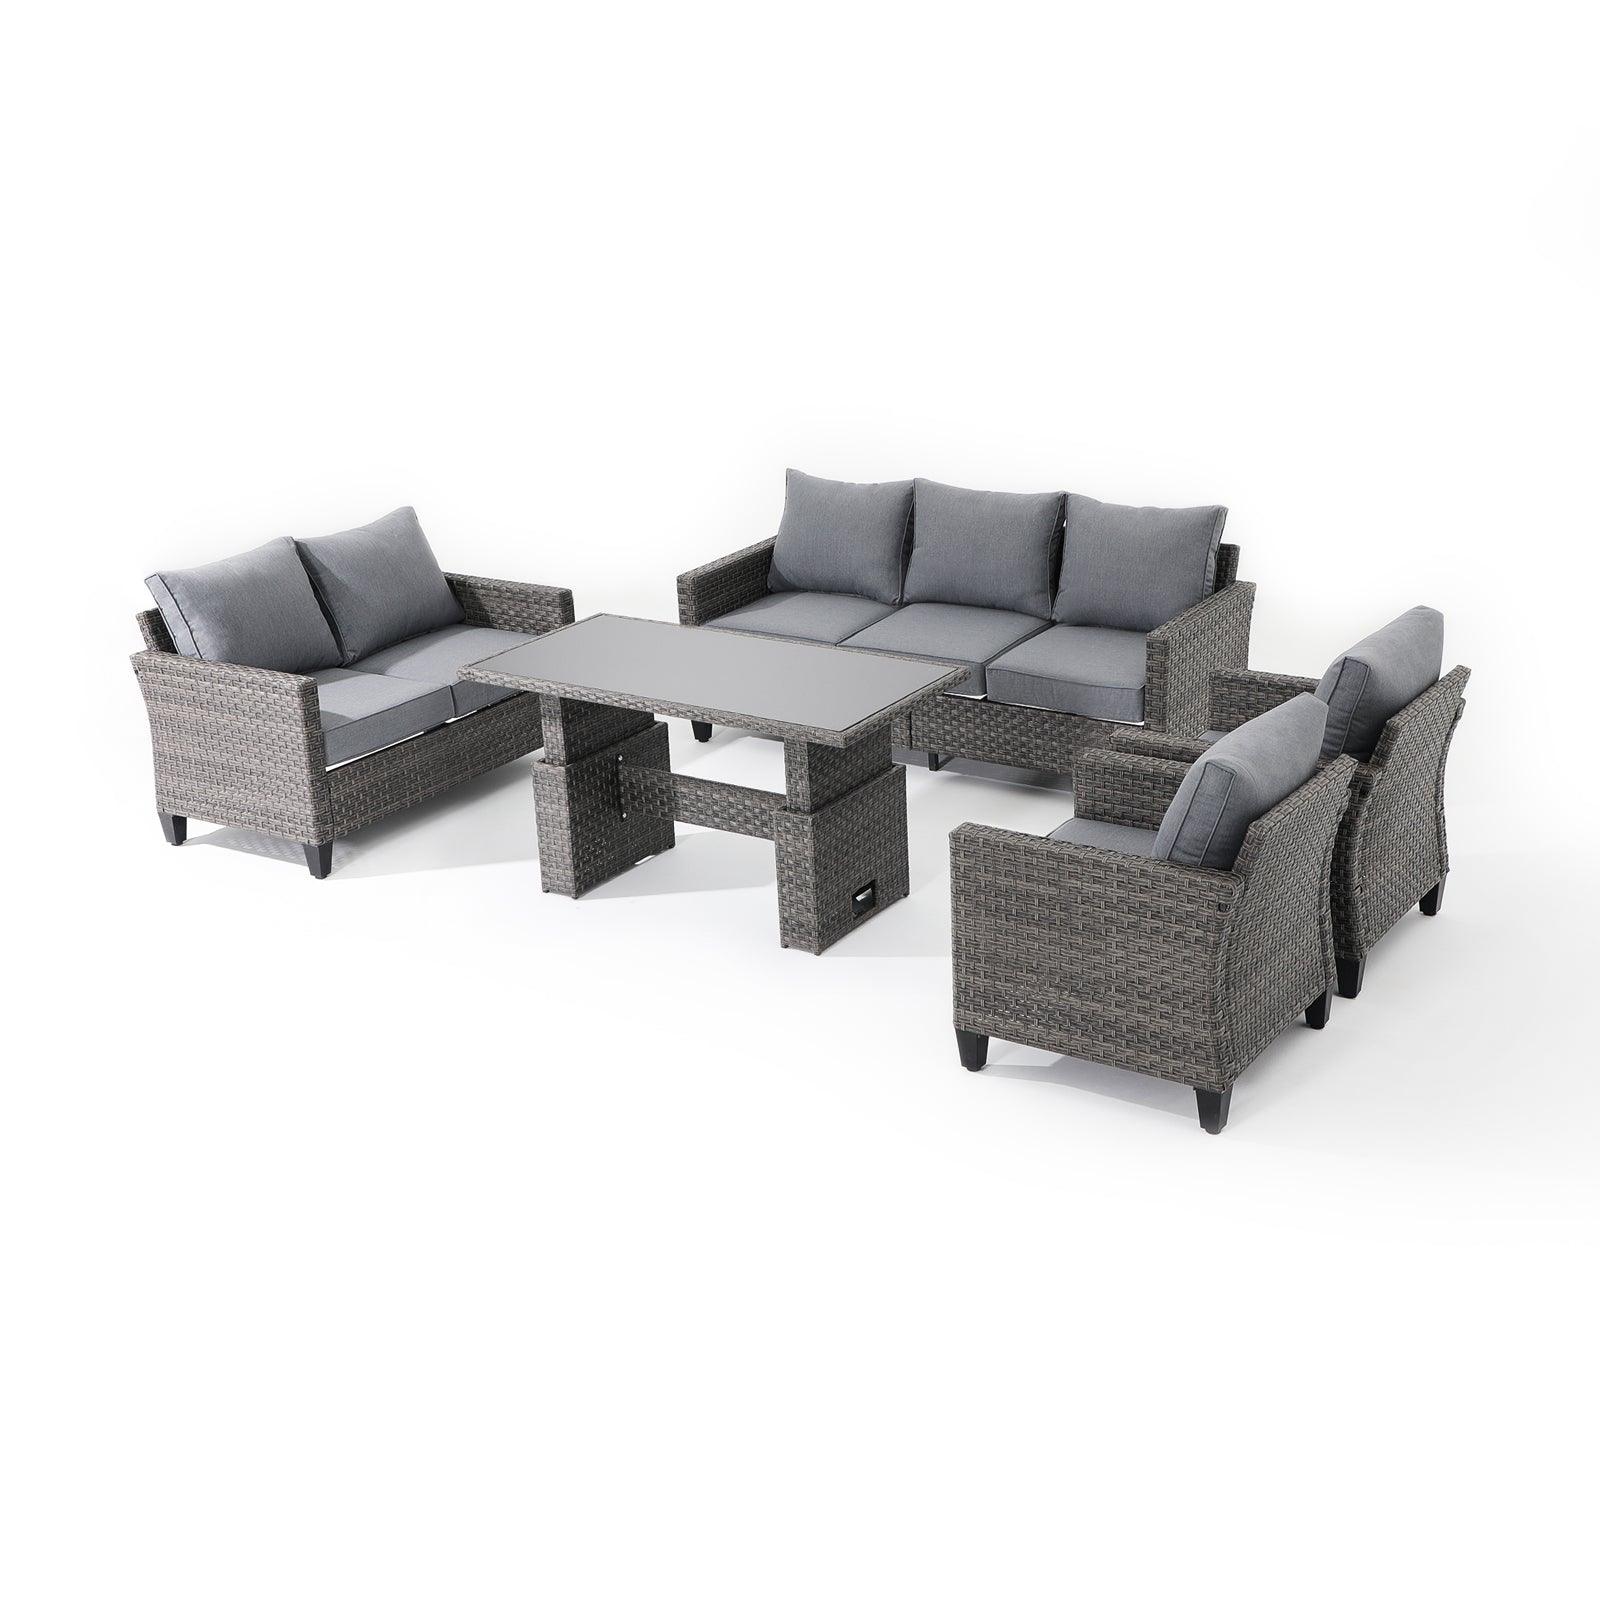 Ayia 5-Piece outdoor Sofa Set with Rattan design, grey cushions, a 3-seater sofa, 2 arm chairs , 1 loveseat, 1 lift-top dining table, left angle view- Jardina Furniture #color_Grey#piece_5-pc. with table